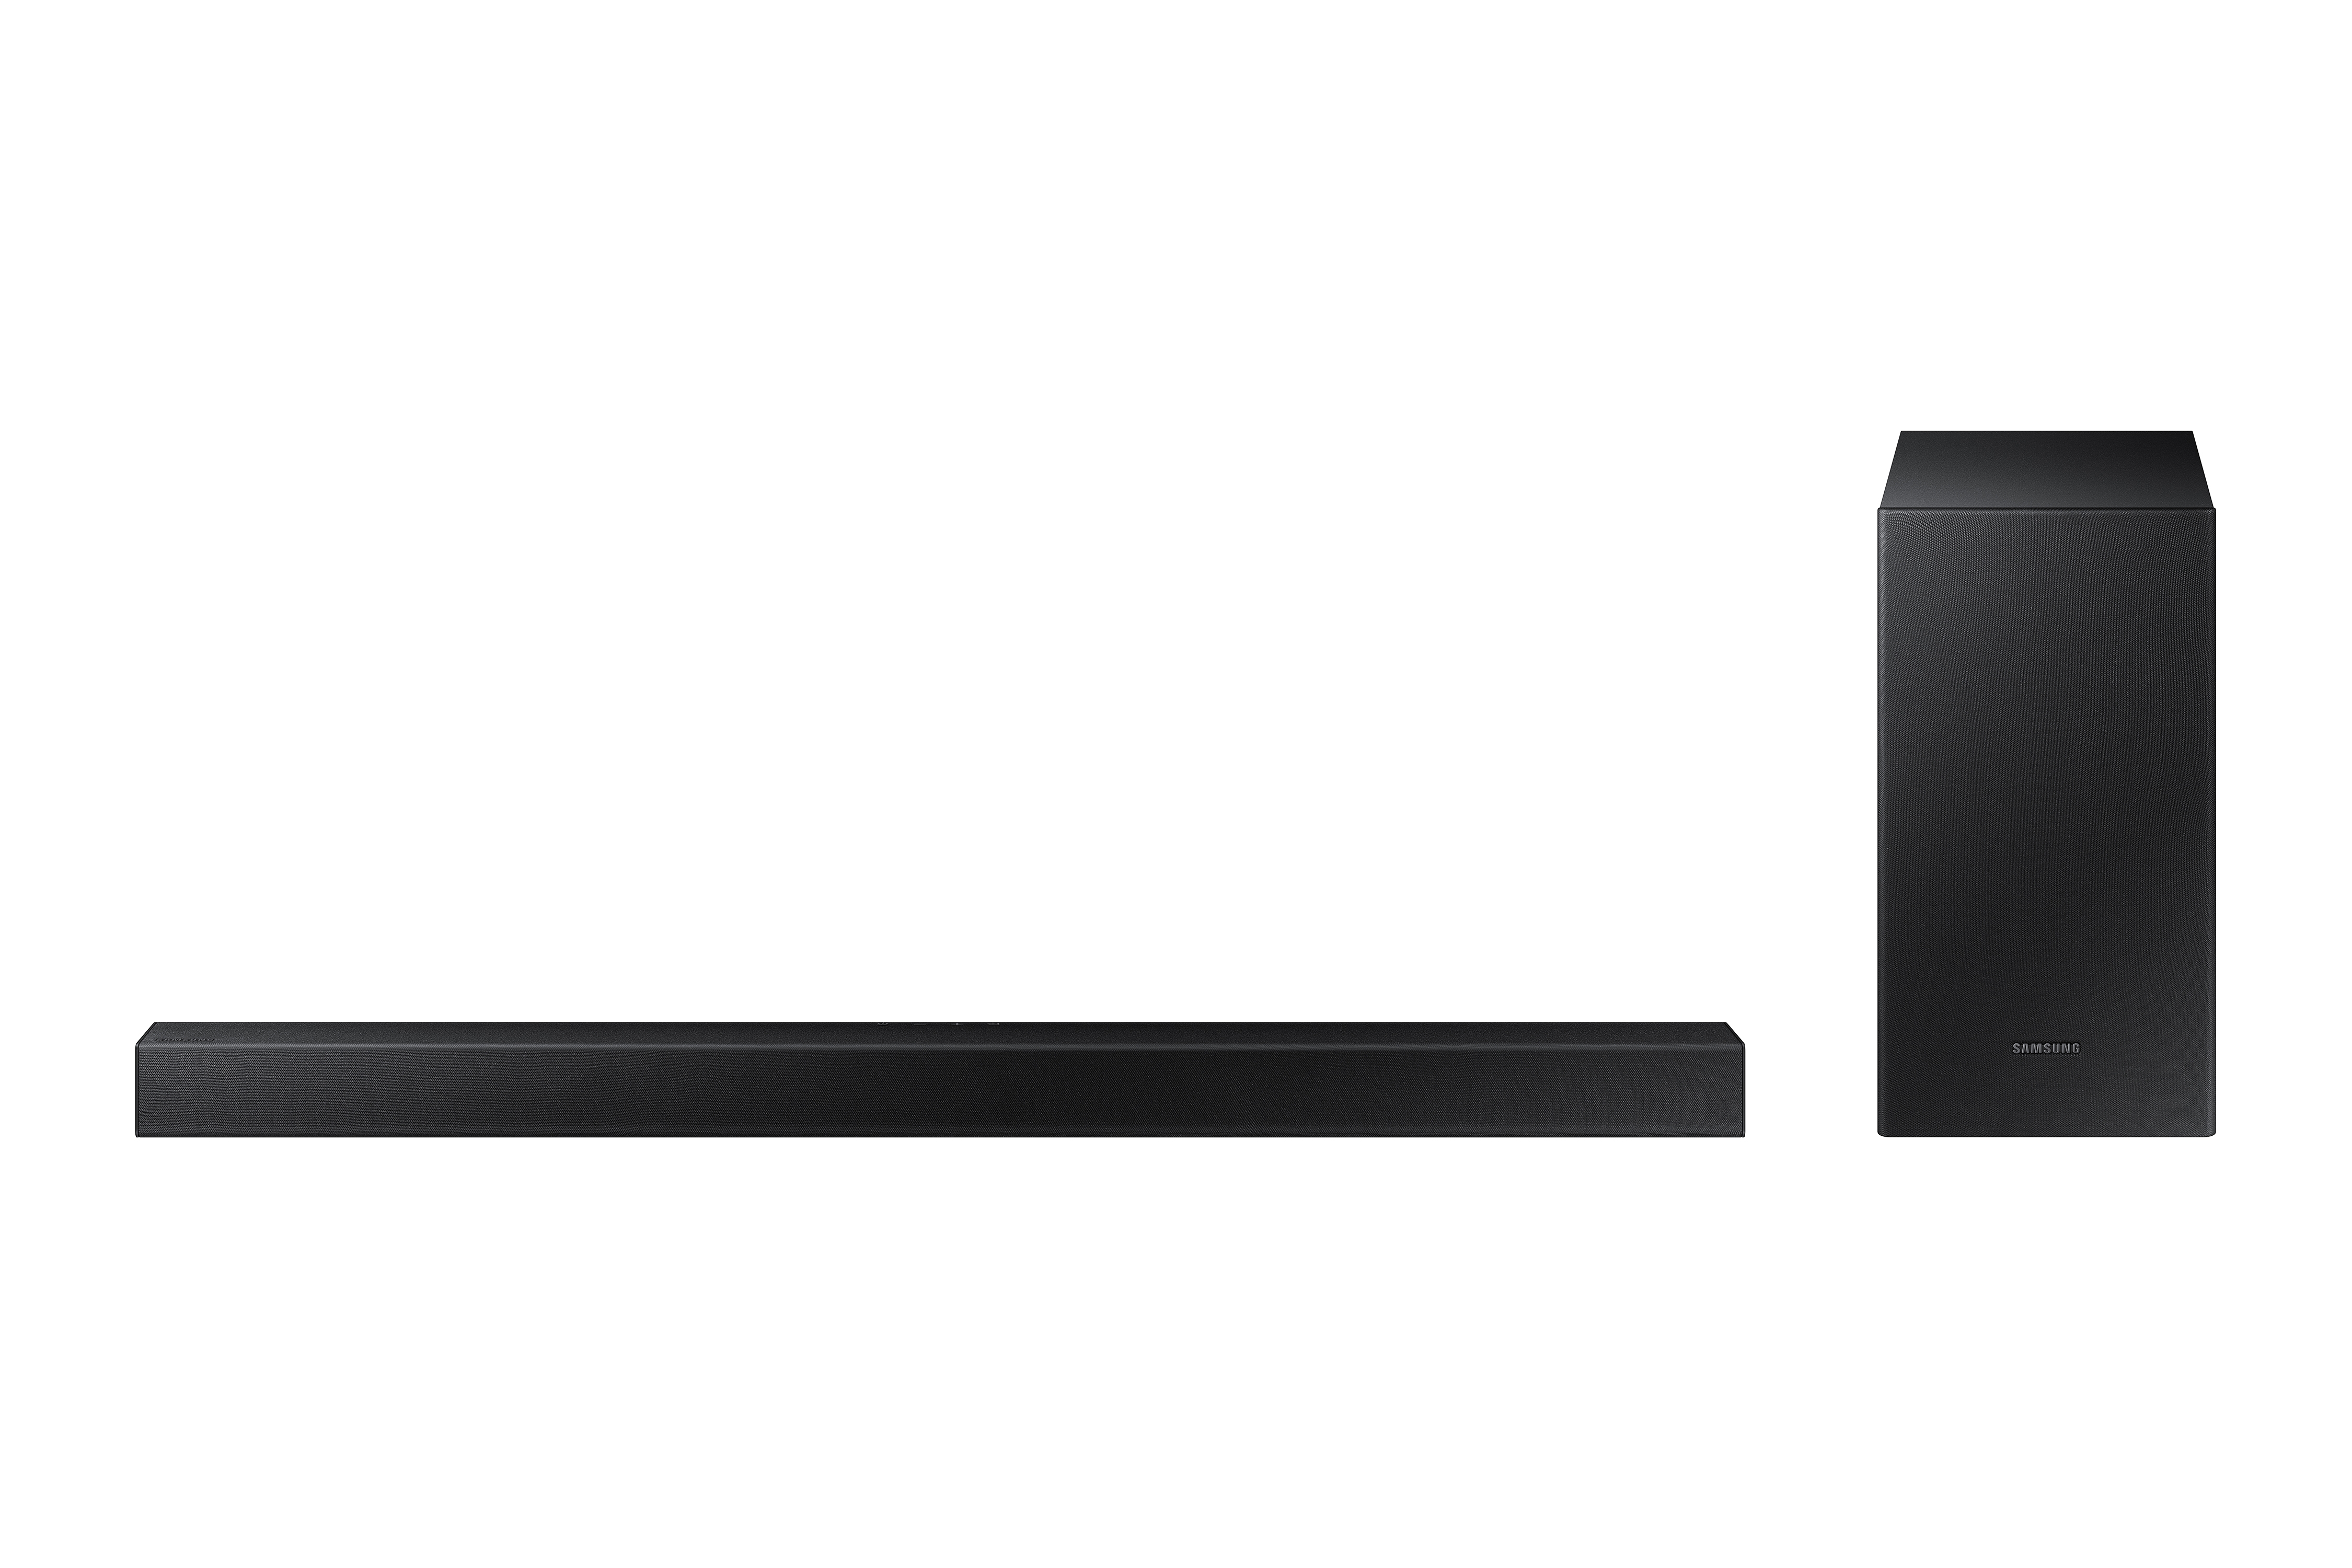 Thumbnail image of Samsung HW-T40M 170W 2.1ch Soundbar with Wireless Subwoofer (2020)